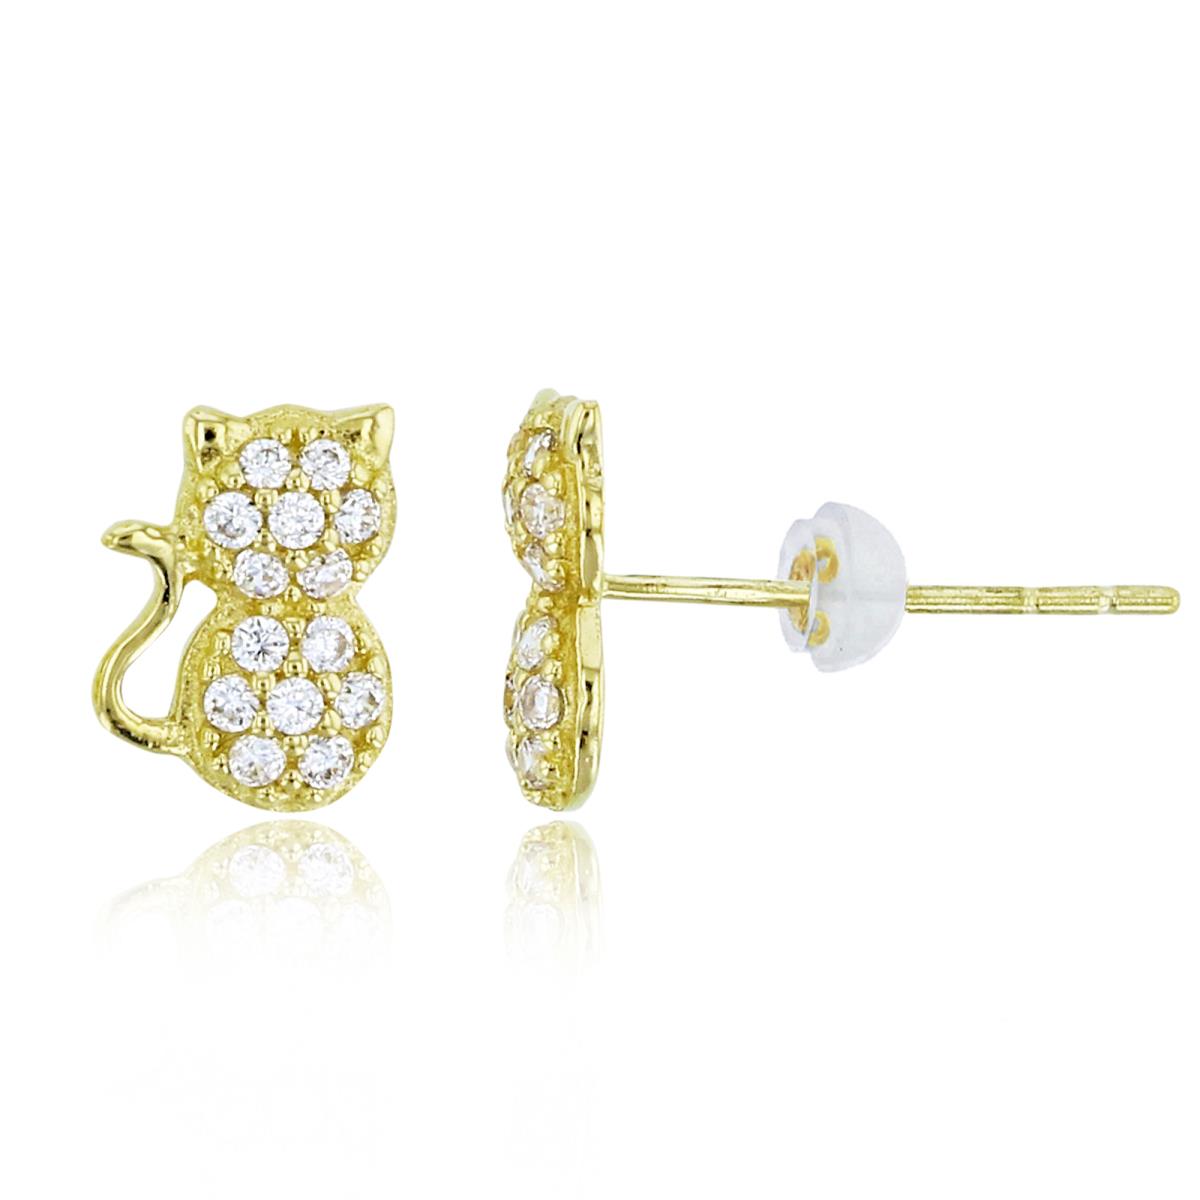 14K Yellow Gold Rnd CZ Pave Kitten Studs with Silicon Backs